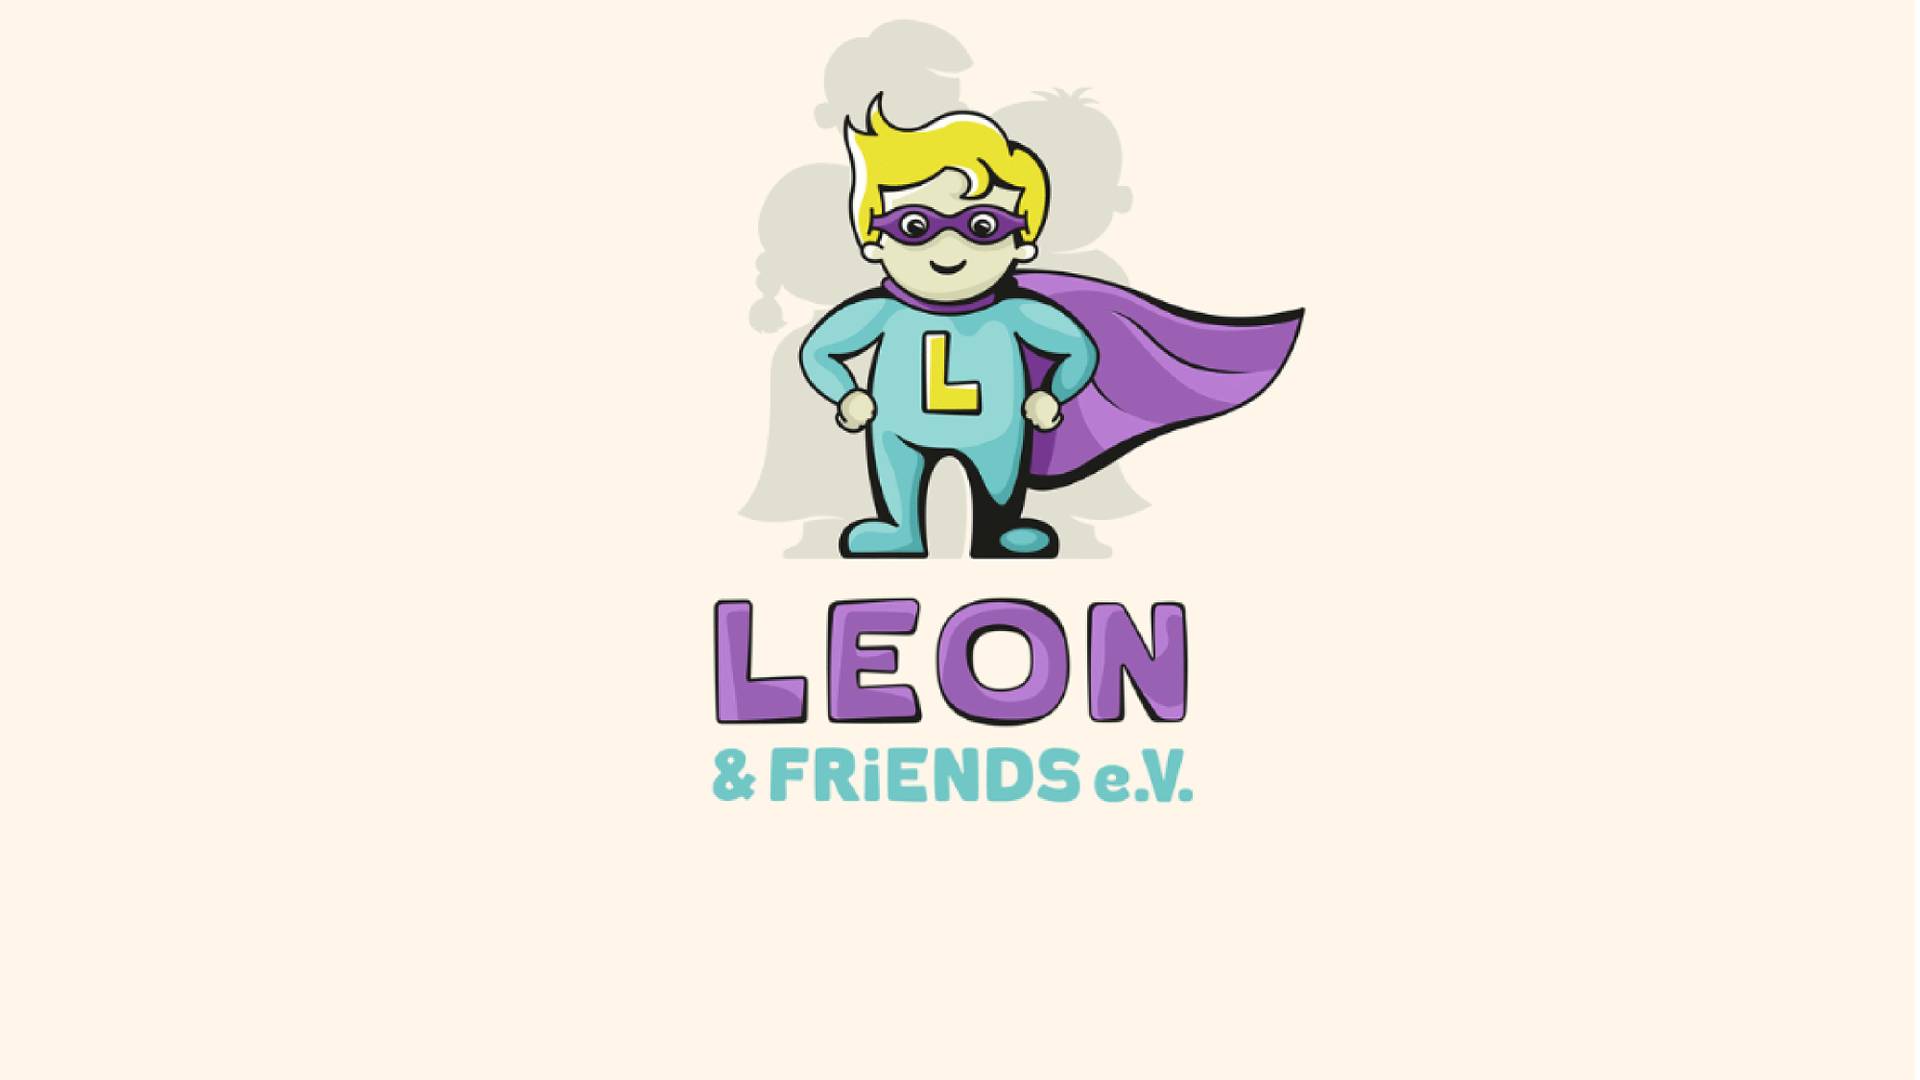 Leon and Friends